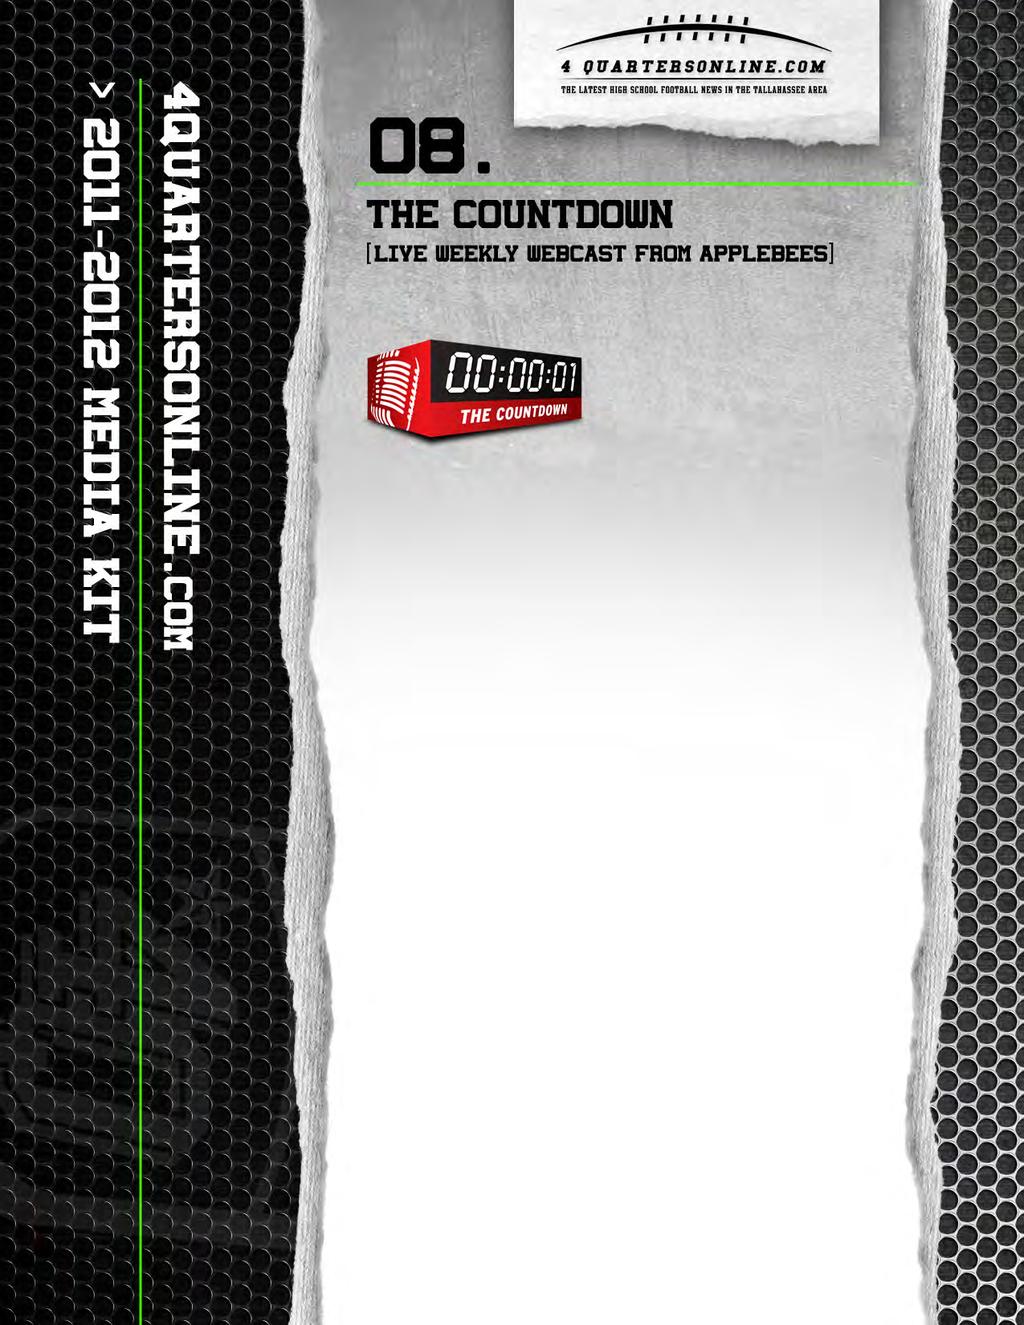 4Quartersonline.com presents Tallahassee s only live high school webcast sports show - The COUNTDOWN!